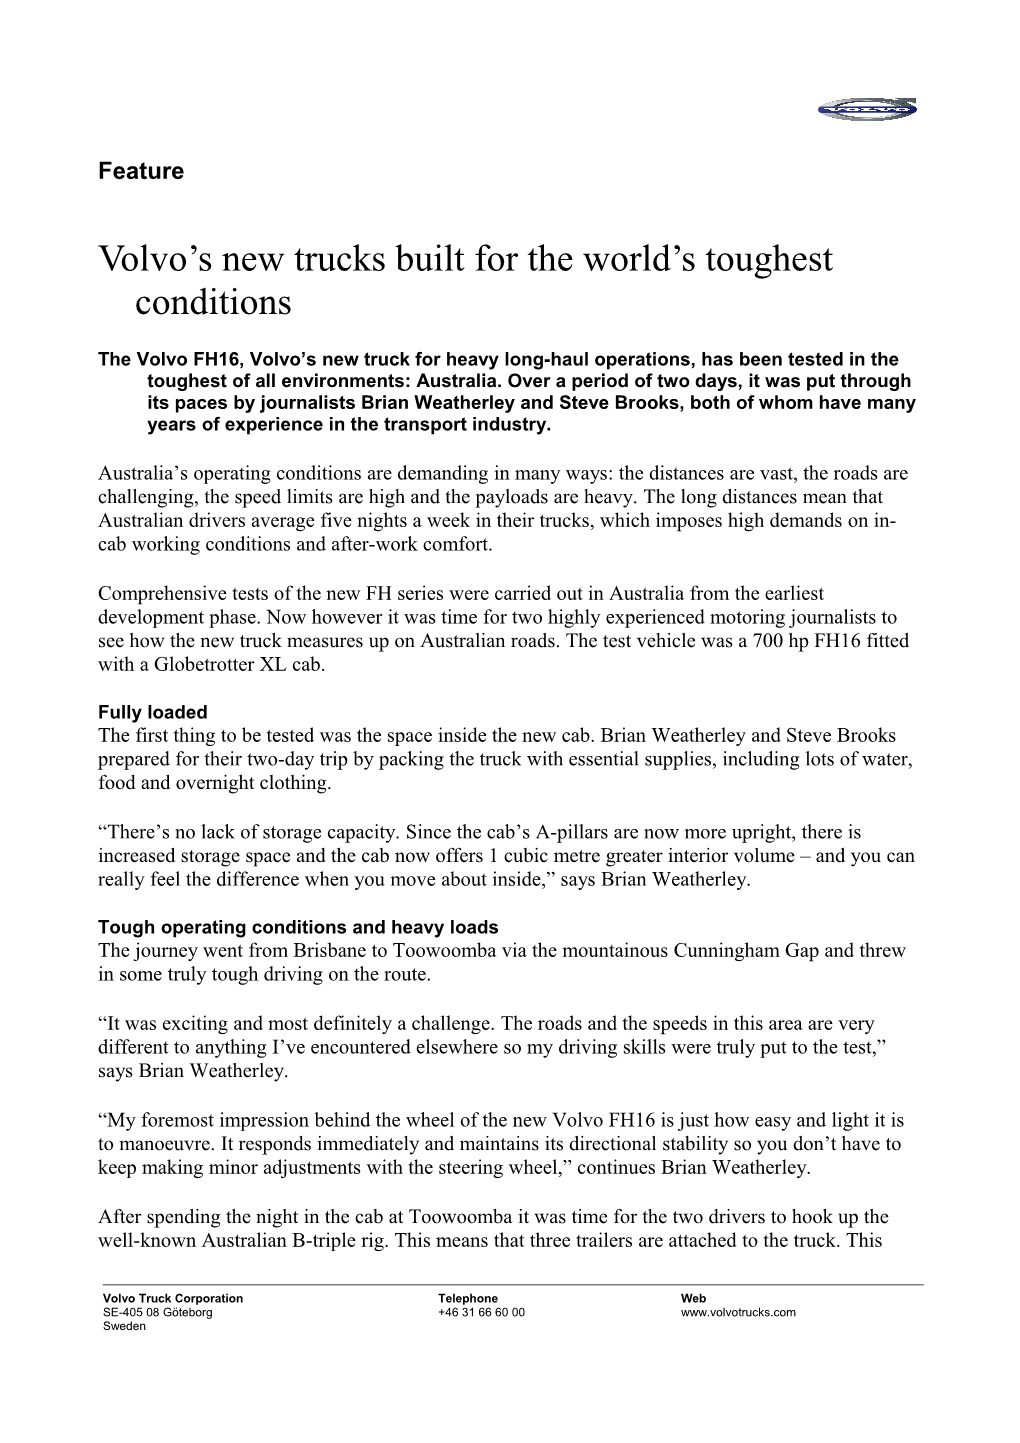 Volvo S New Trucks Built for the World S Toughest Conditions